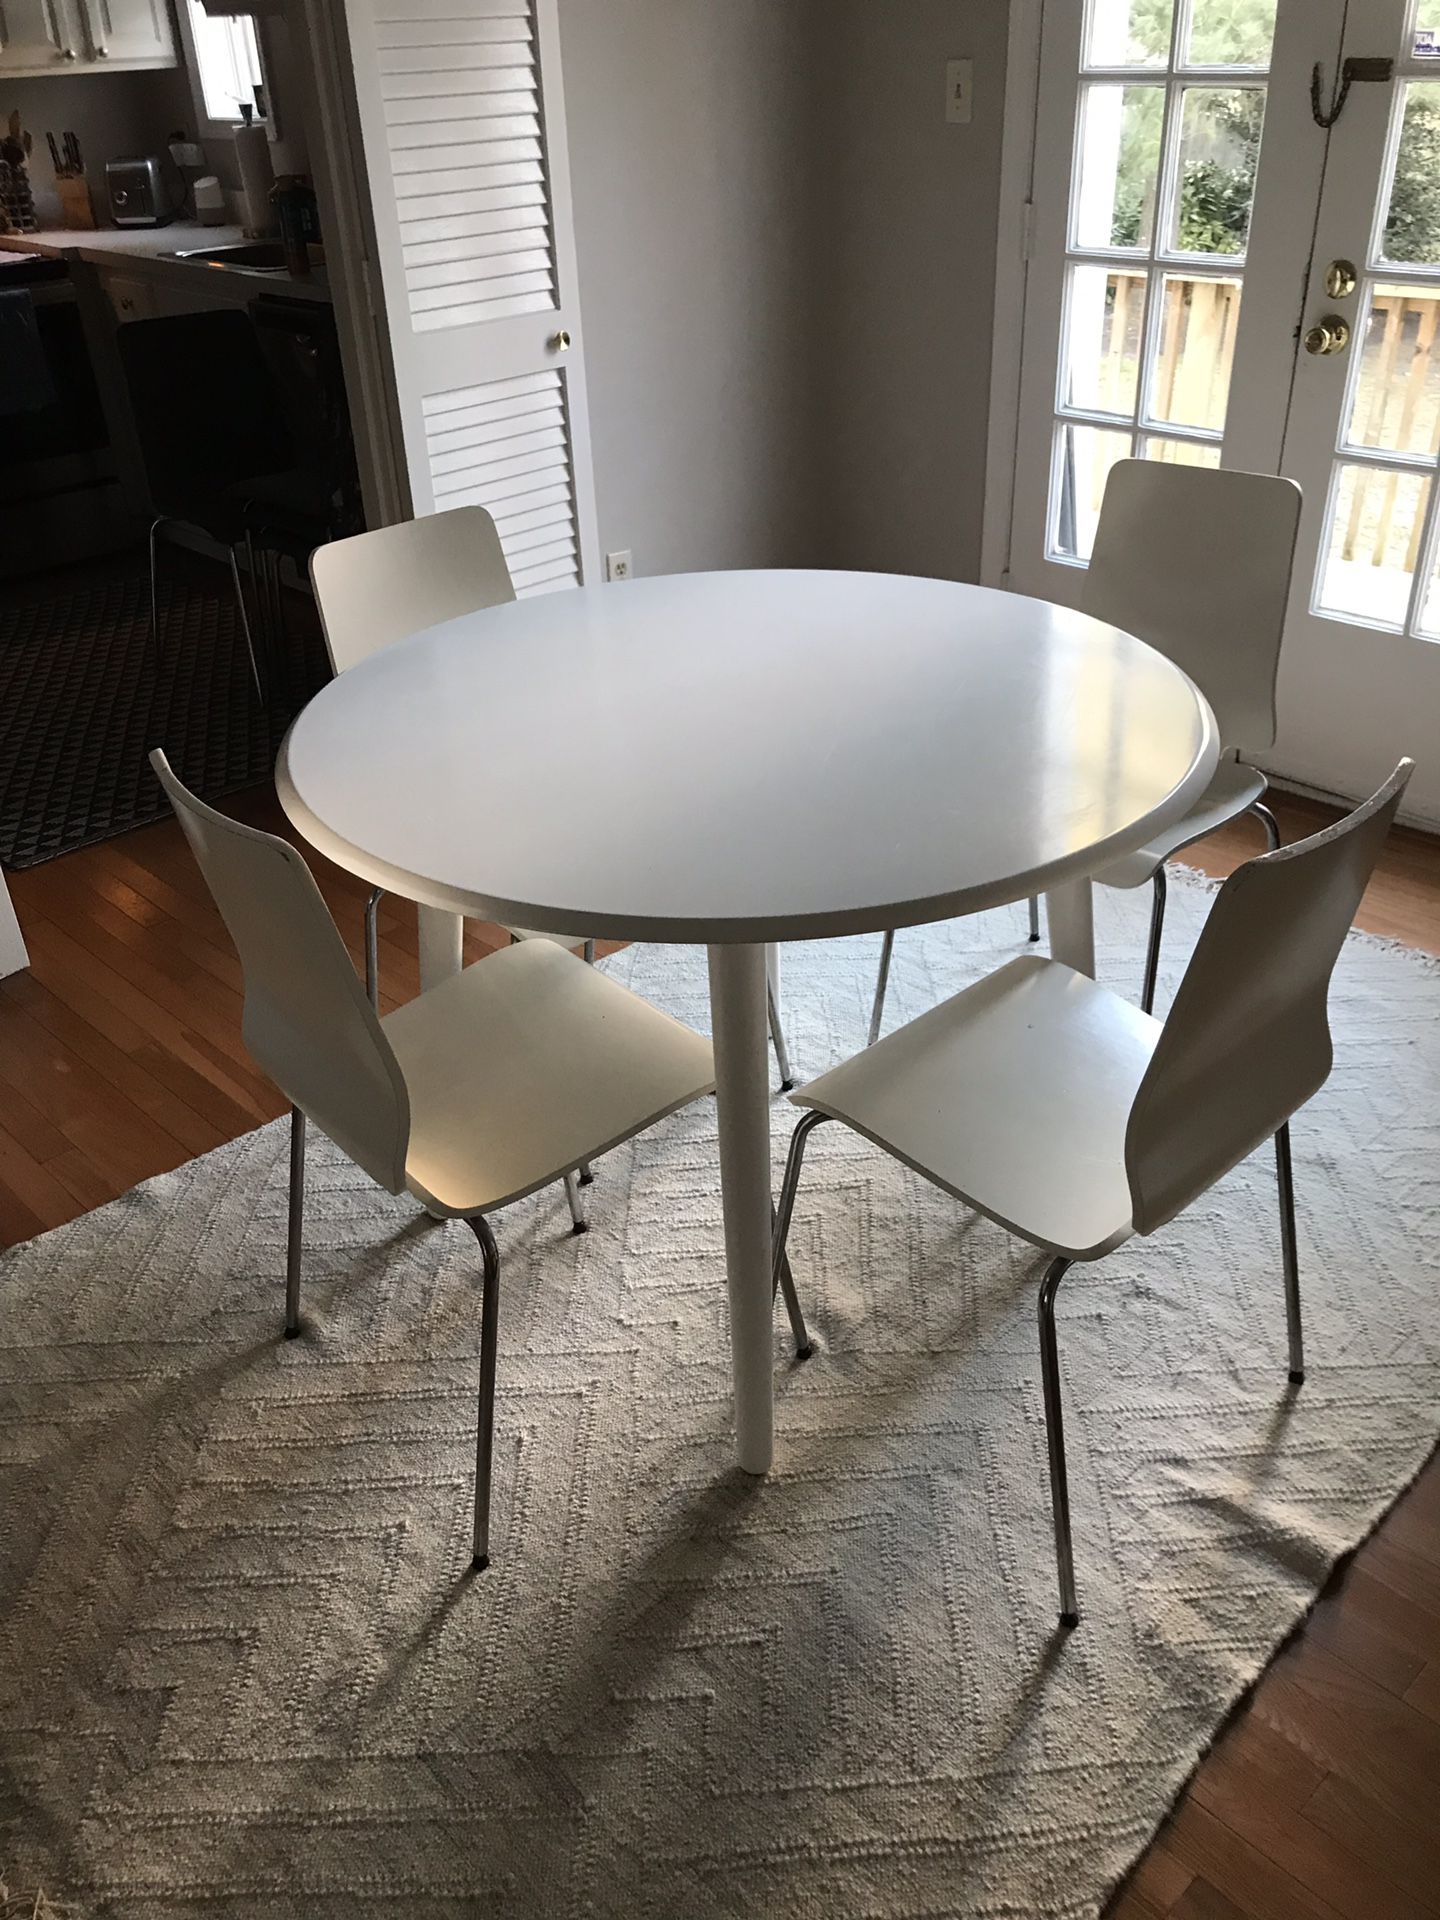 Round Dining Table in White Wood with 4 White Chairs